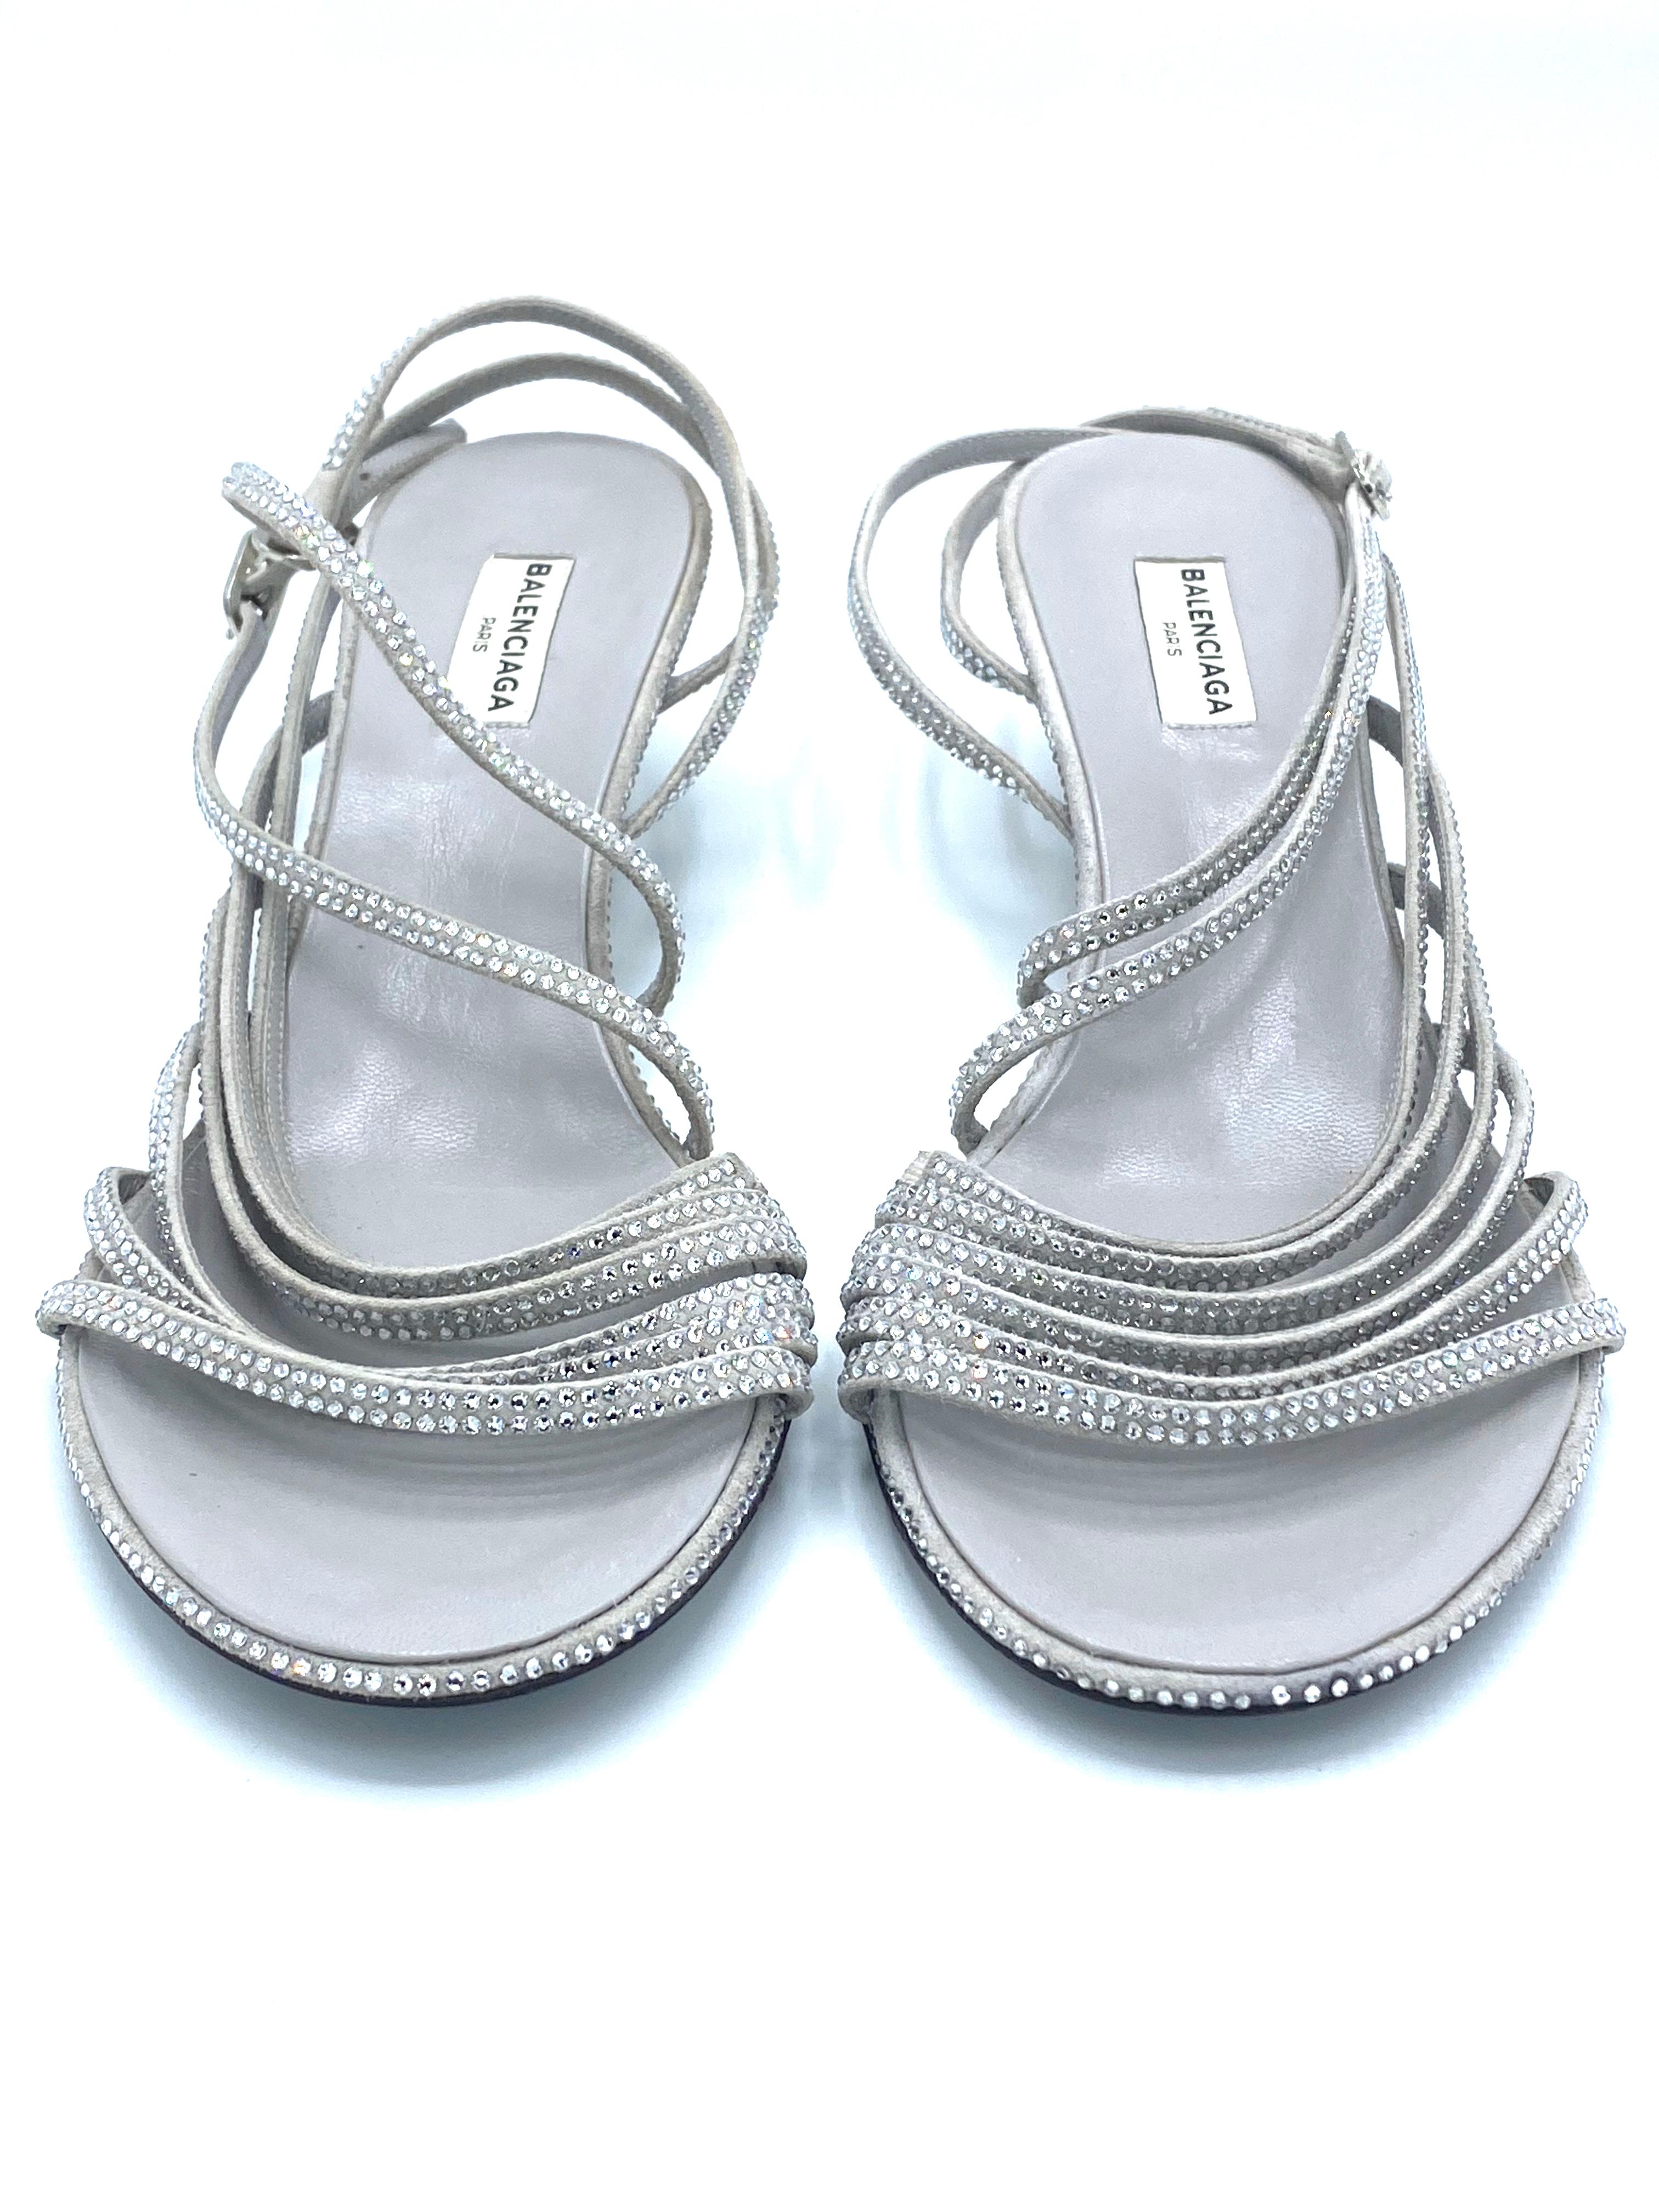 Product details:

Featuring grey suede with crystal detail, strappy style with low heel, measures approx. 60mm/ 2.5